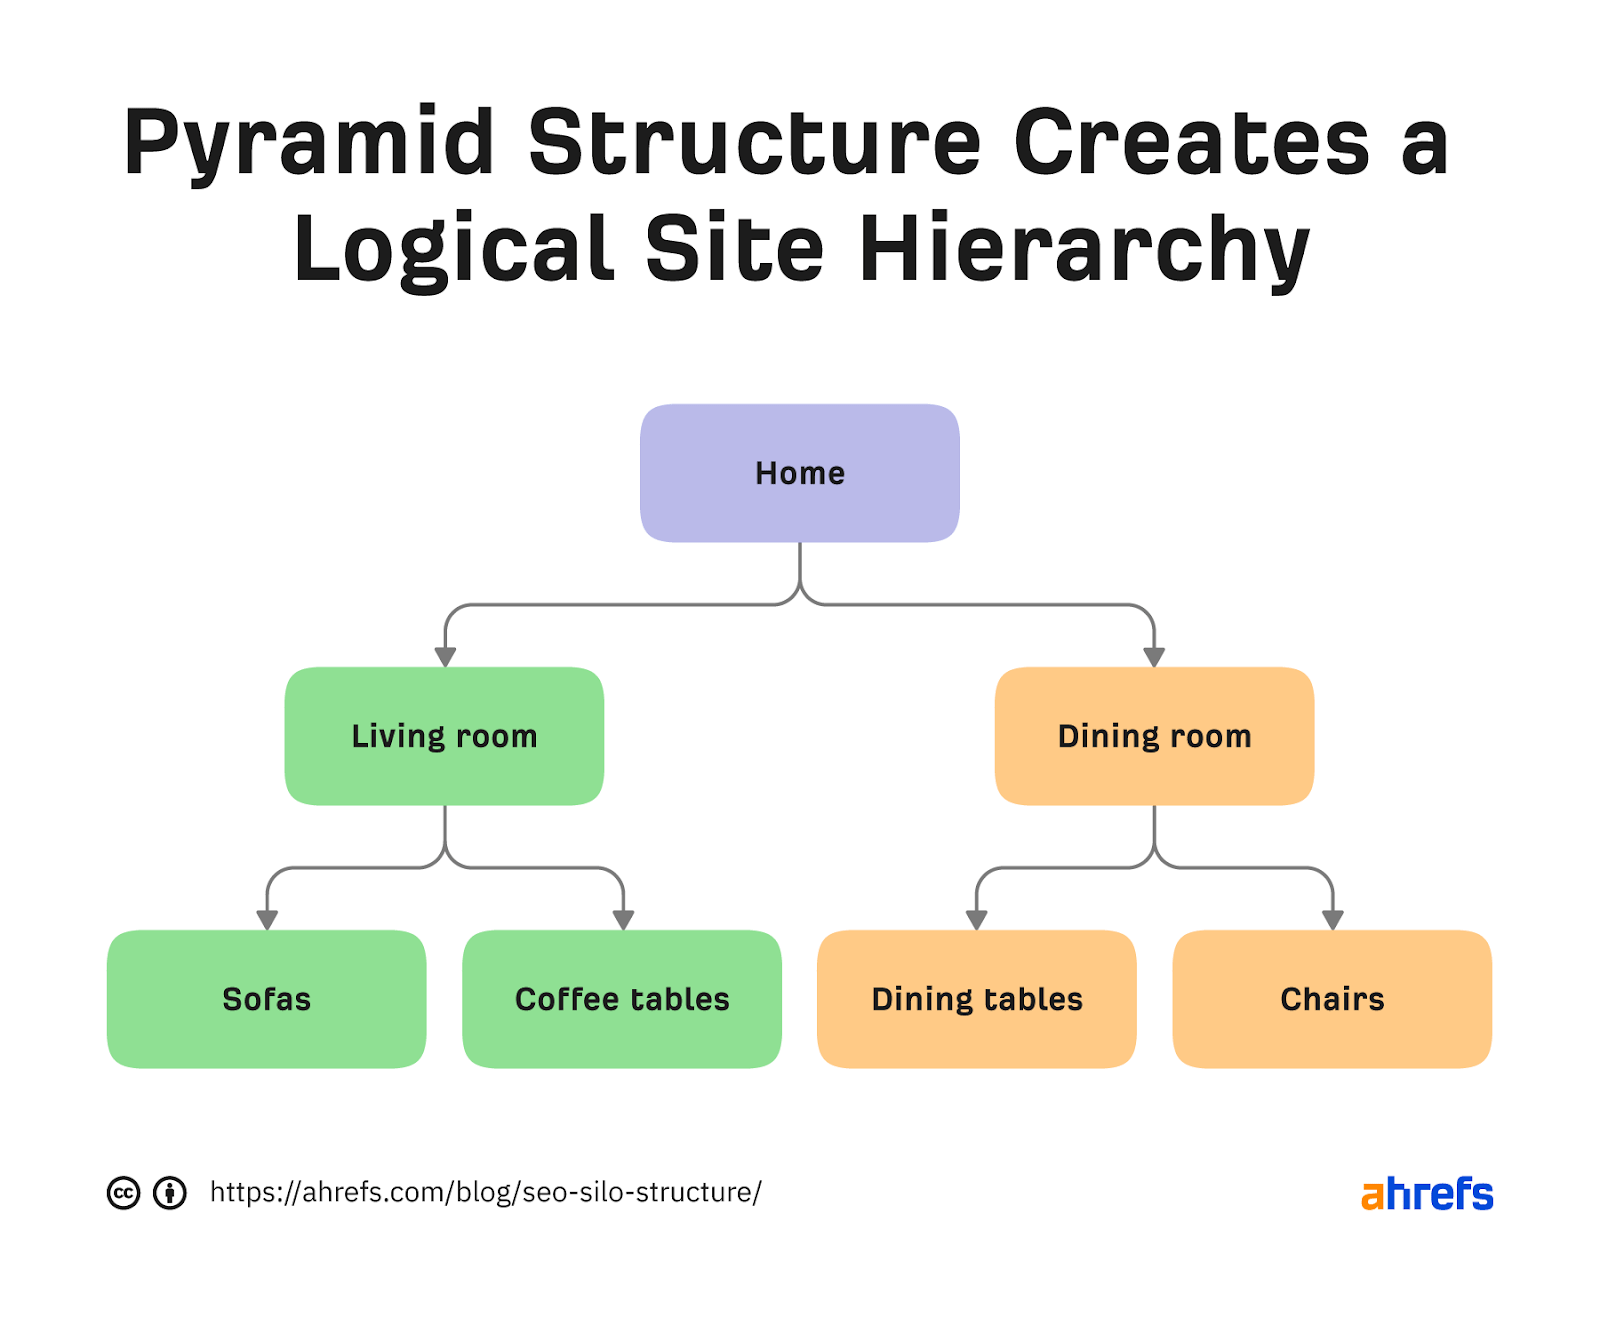 Flowchart of pyramid structure with "home" branching out to "living room" and "dining room"; each of them then branches out to related furniture categories 